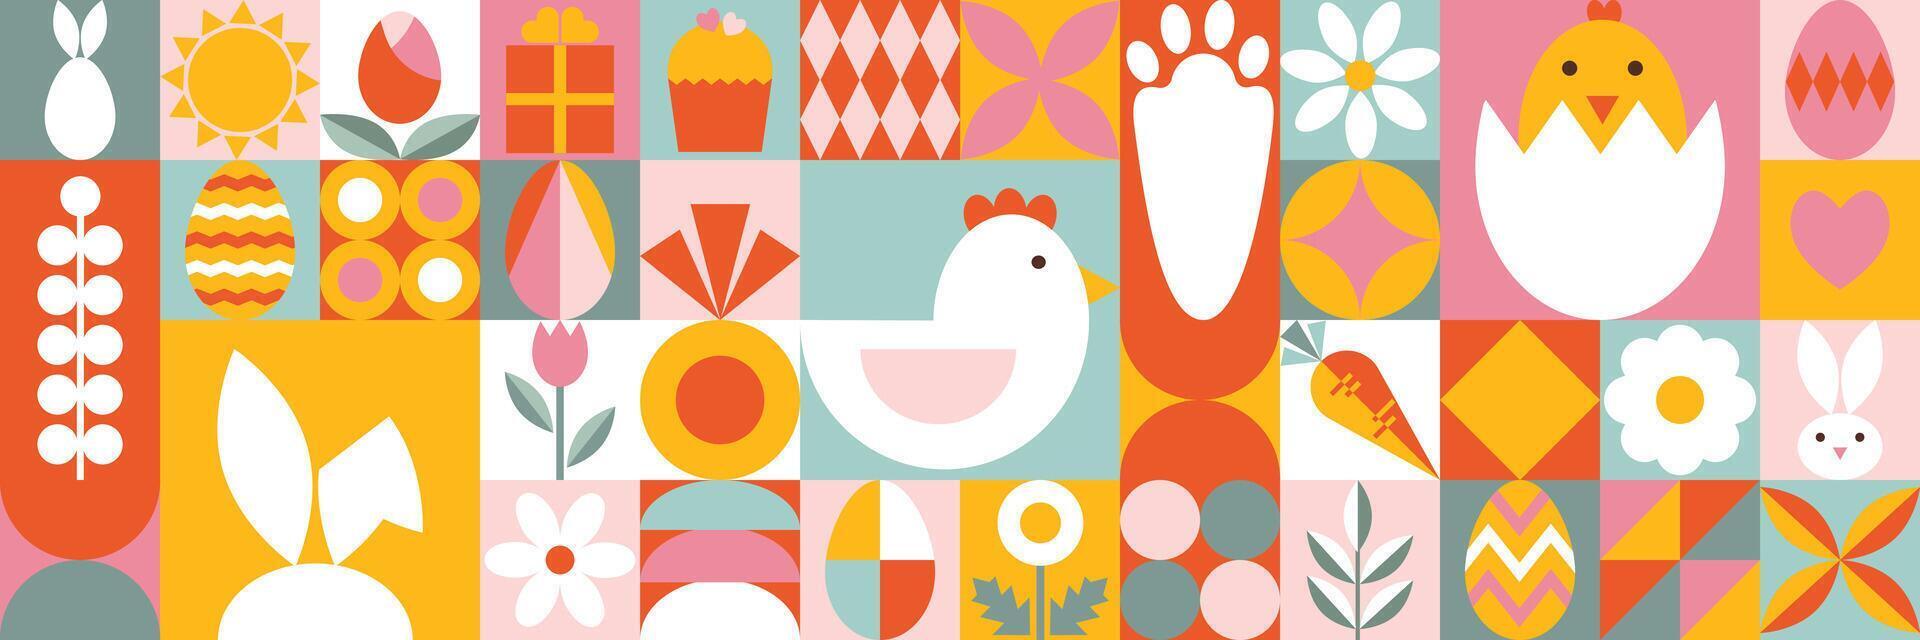 Abstract geometric Happy Easter horizontal banner. Icon with holiday symbols. Stylized bunny, eggs, carrot, flowers, chicken. Design for background, wallpaper, advertising, cover. Bauhaus style. vector